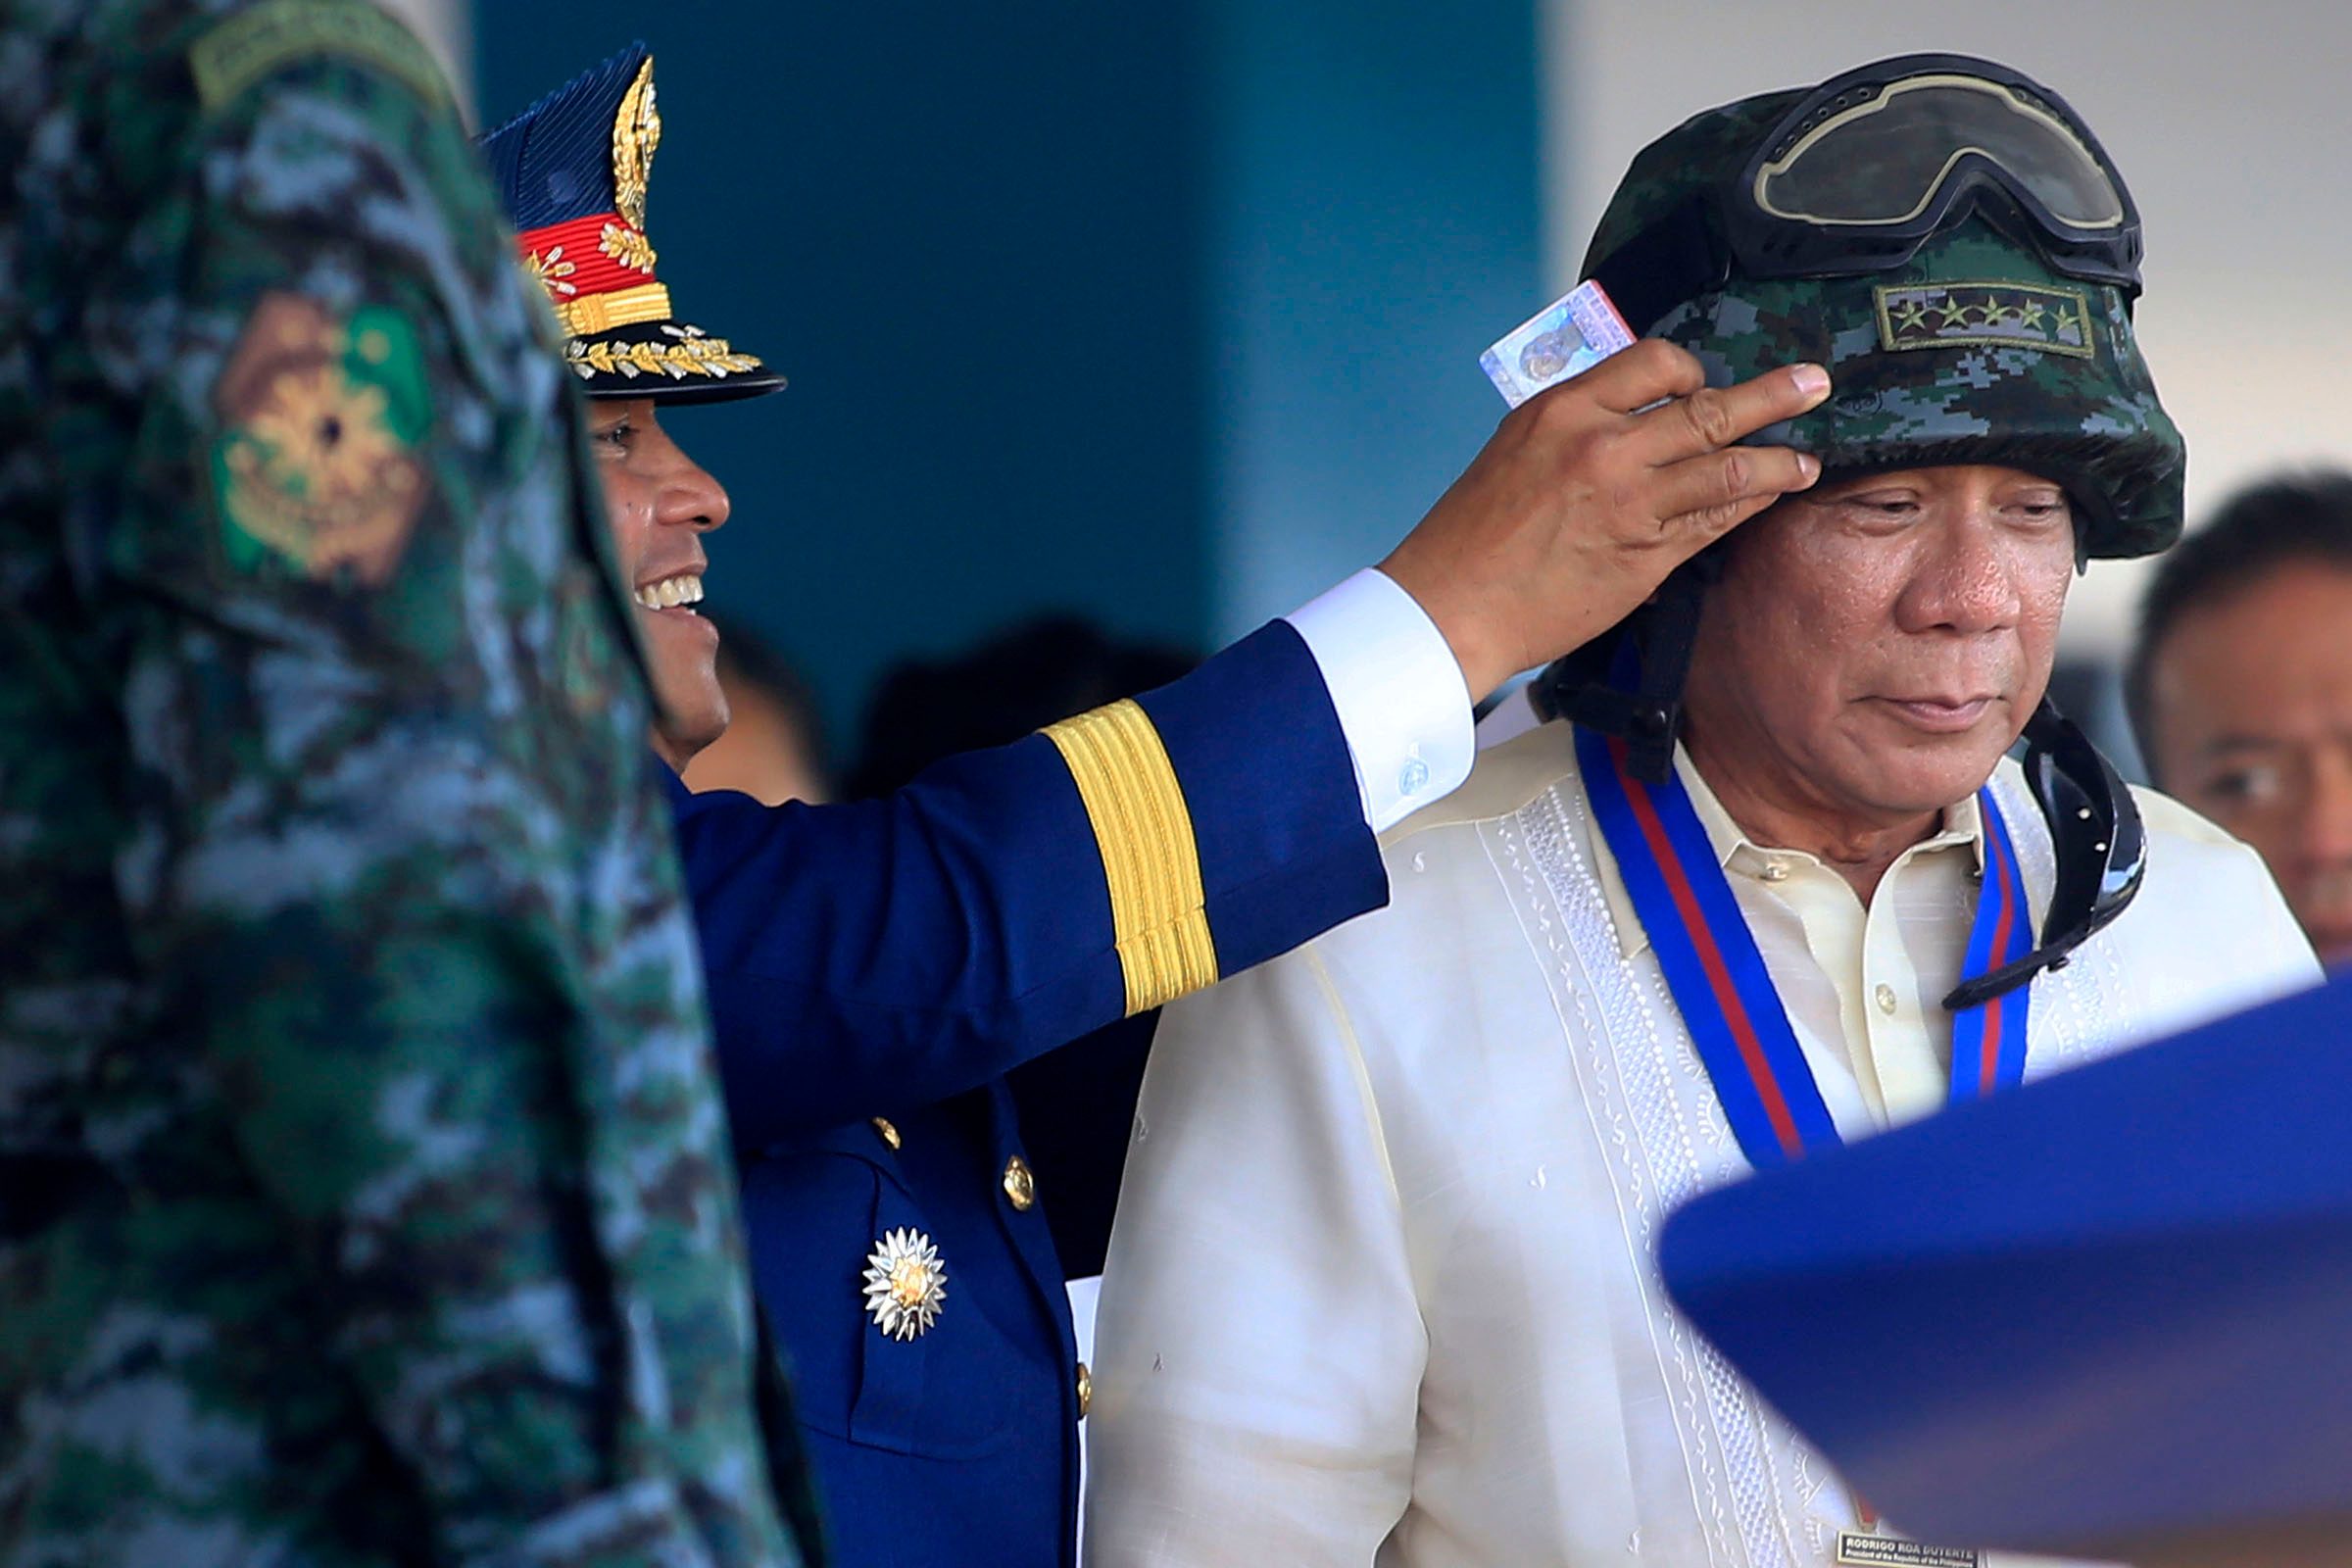 PRESENT. PNP chief Ronald Dela Rosa fixes the helmet of President Rodrigo Duterte,  given by the Special Action Force during the 116th anniversary of the PNP in Camp Crame on August 9, 2017. Photo by Ben Nabong/Rappler   